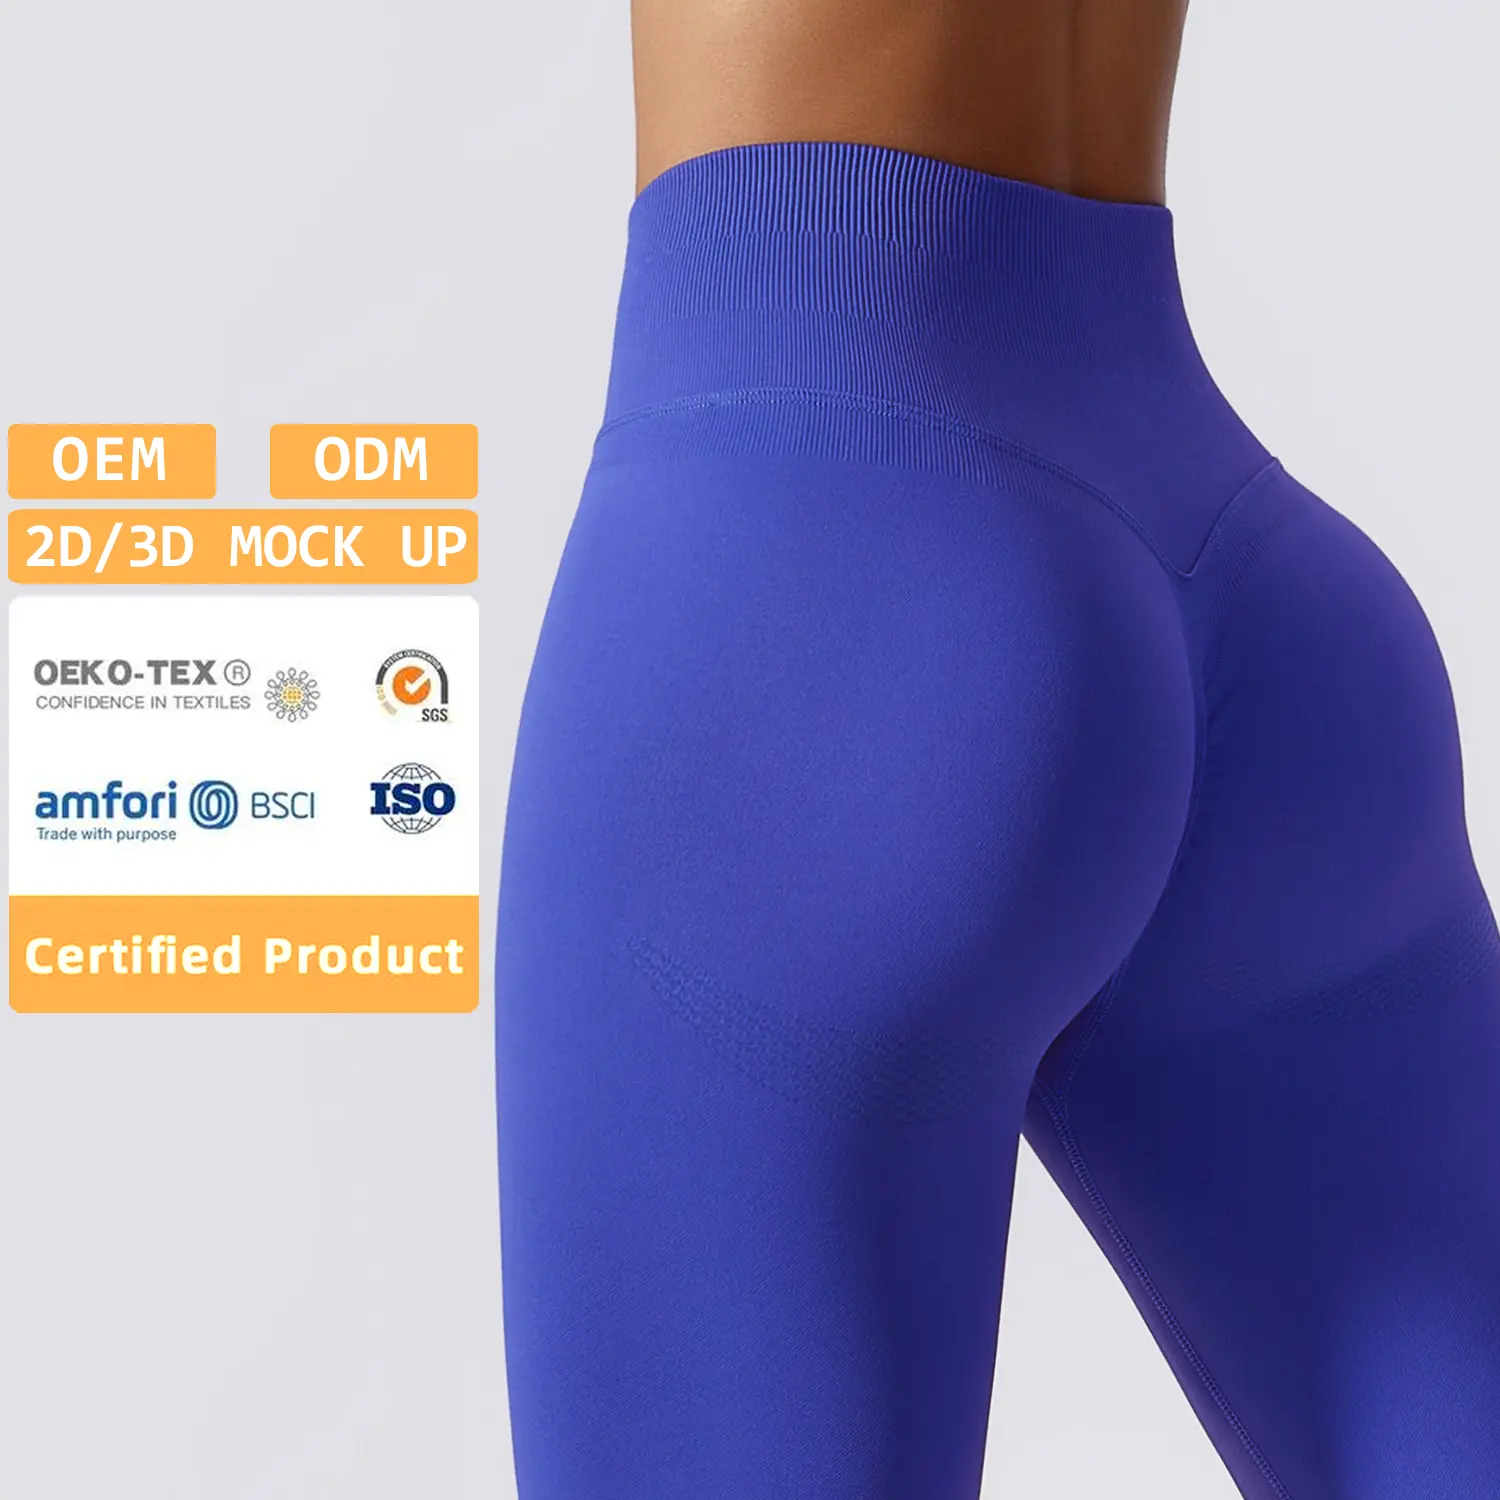 Women's Solid Colors Back V Stitching Non See Through Seamless Gym Tights High Waist Butt Lifting Athletic Workout Yoga Leggings